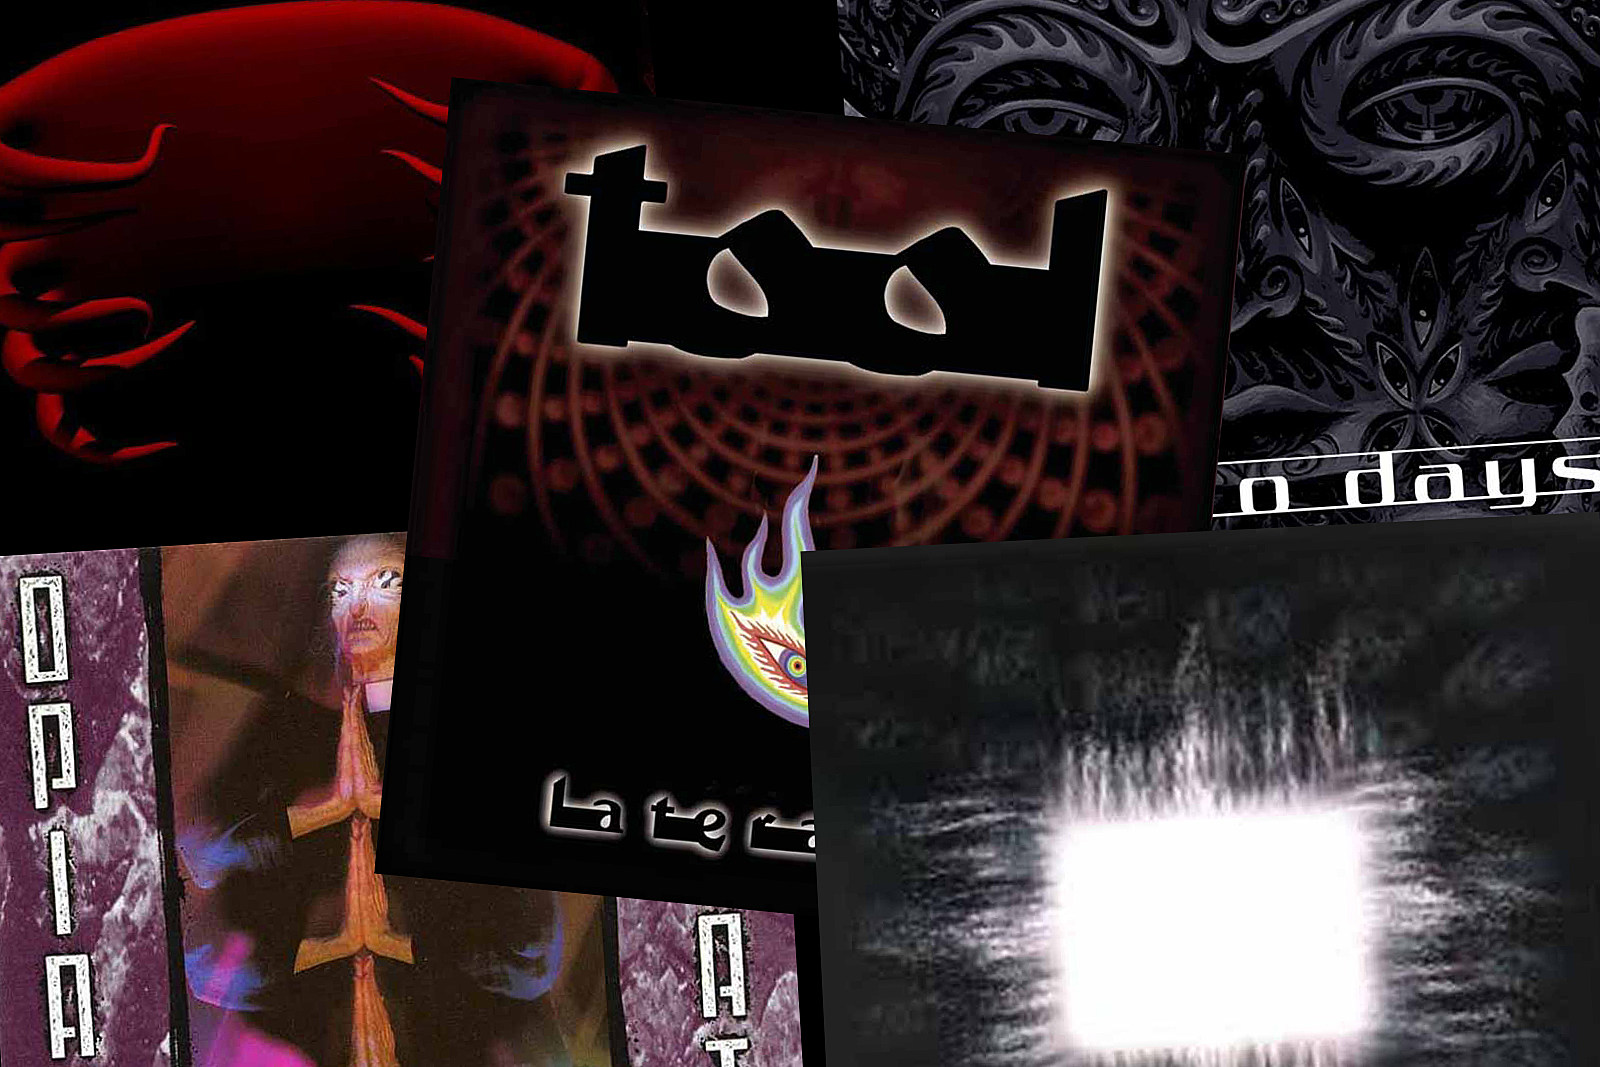 Tool Album Guide: How to Approach the Band's Complicated Catalog